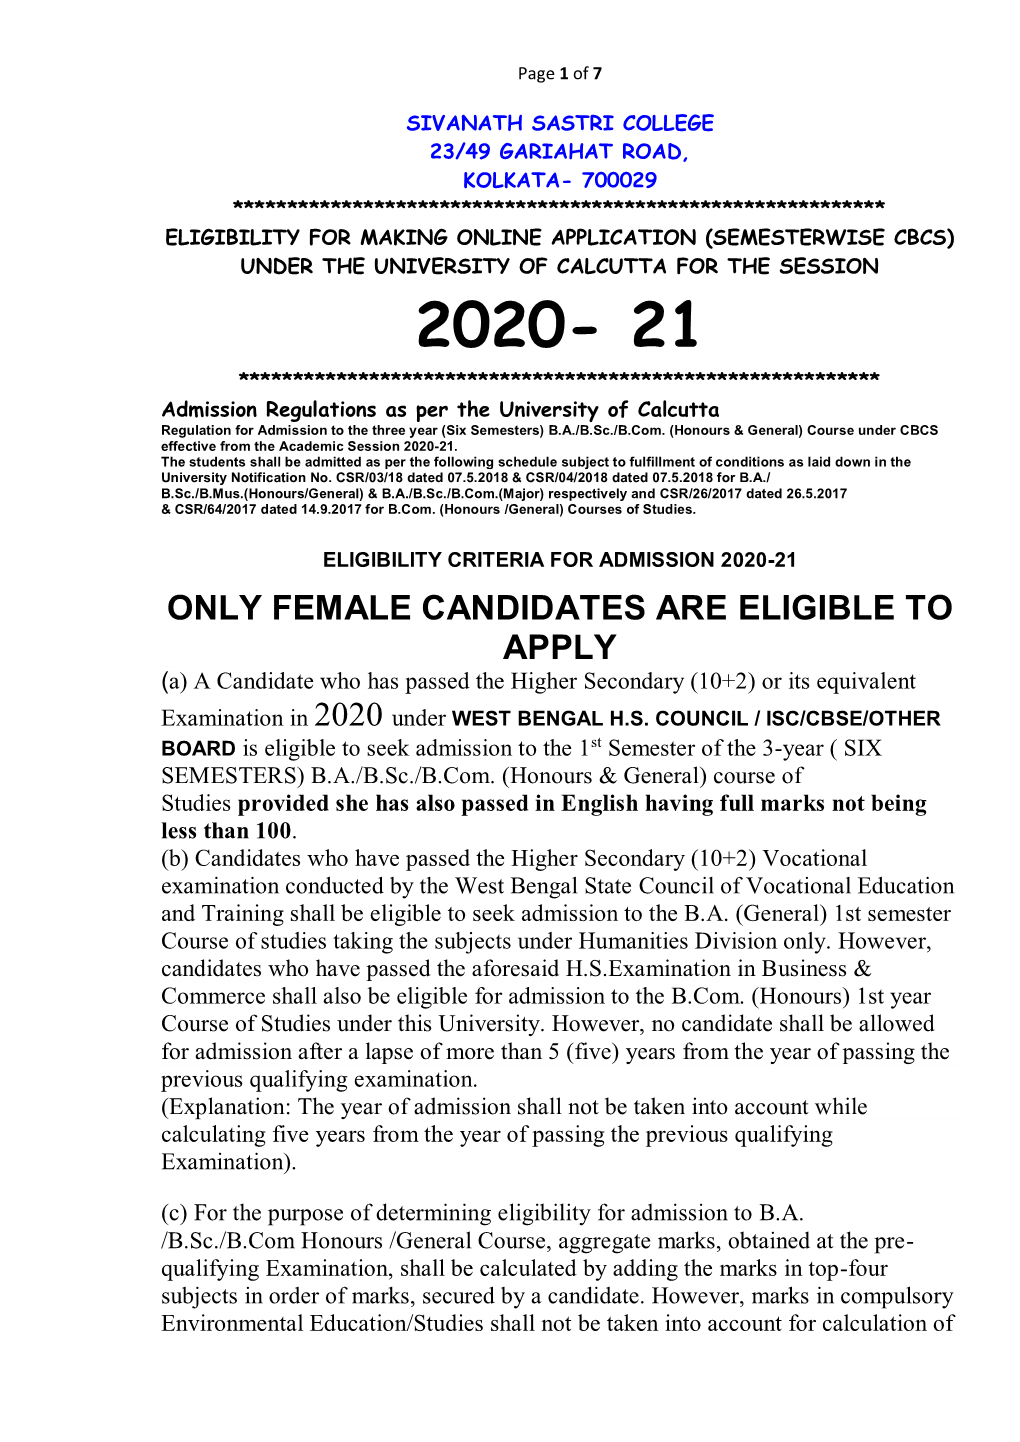 ADMISSION NORMS of 2020-21.Pdf